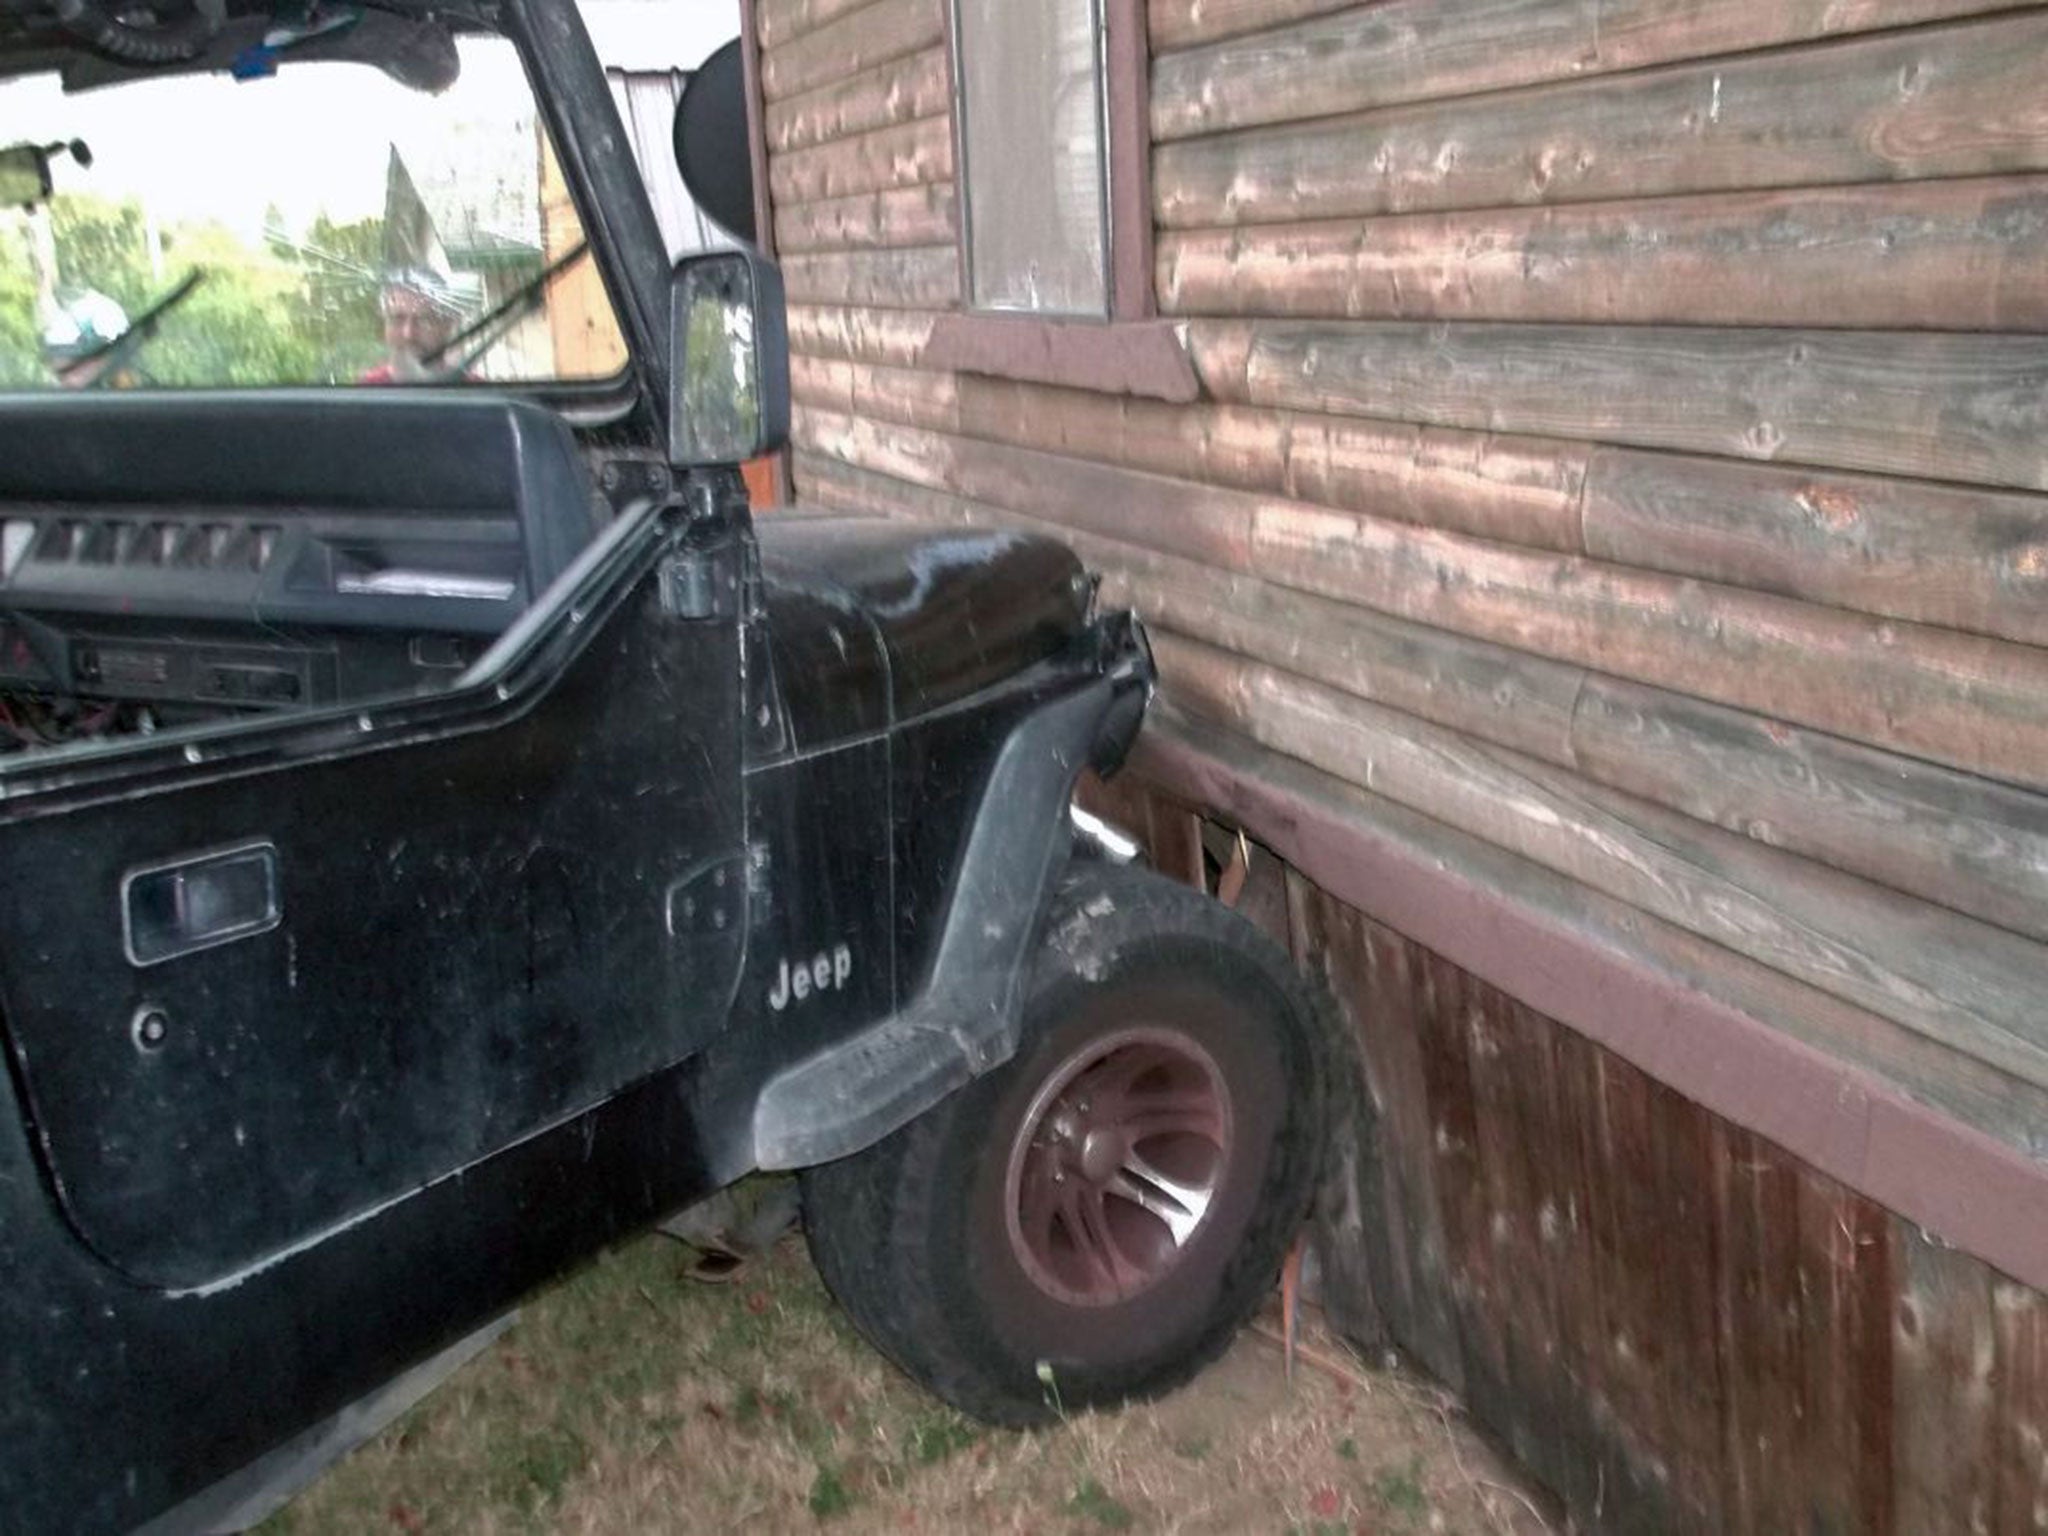 This photo provided by the Myrtle Creek Police Department shows a Jeep that authorities say a toddler crashed into an home in Myrtle Creek, Ore